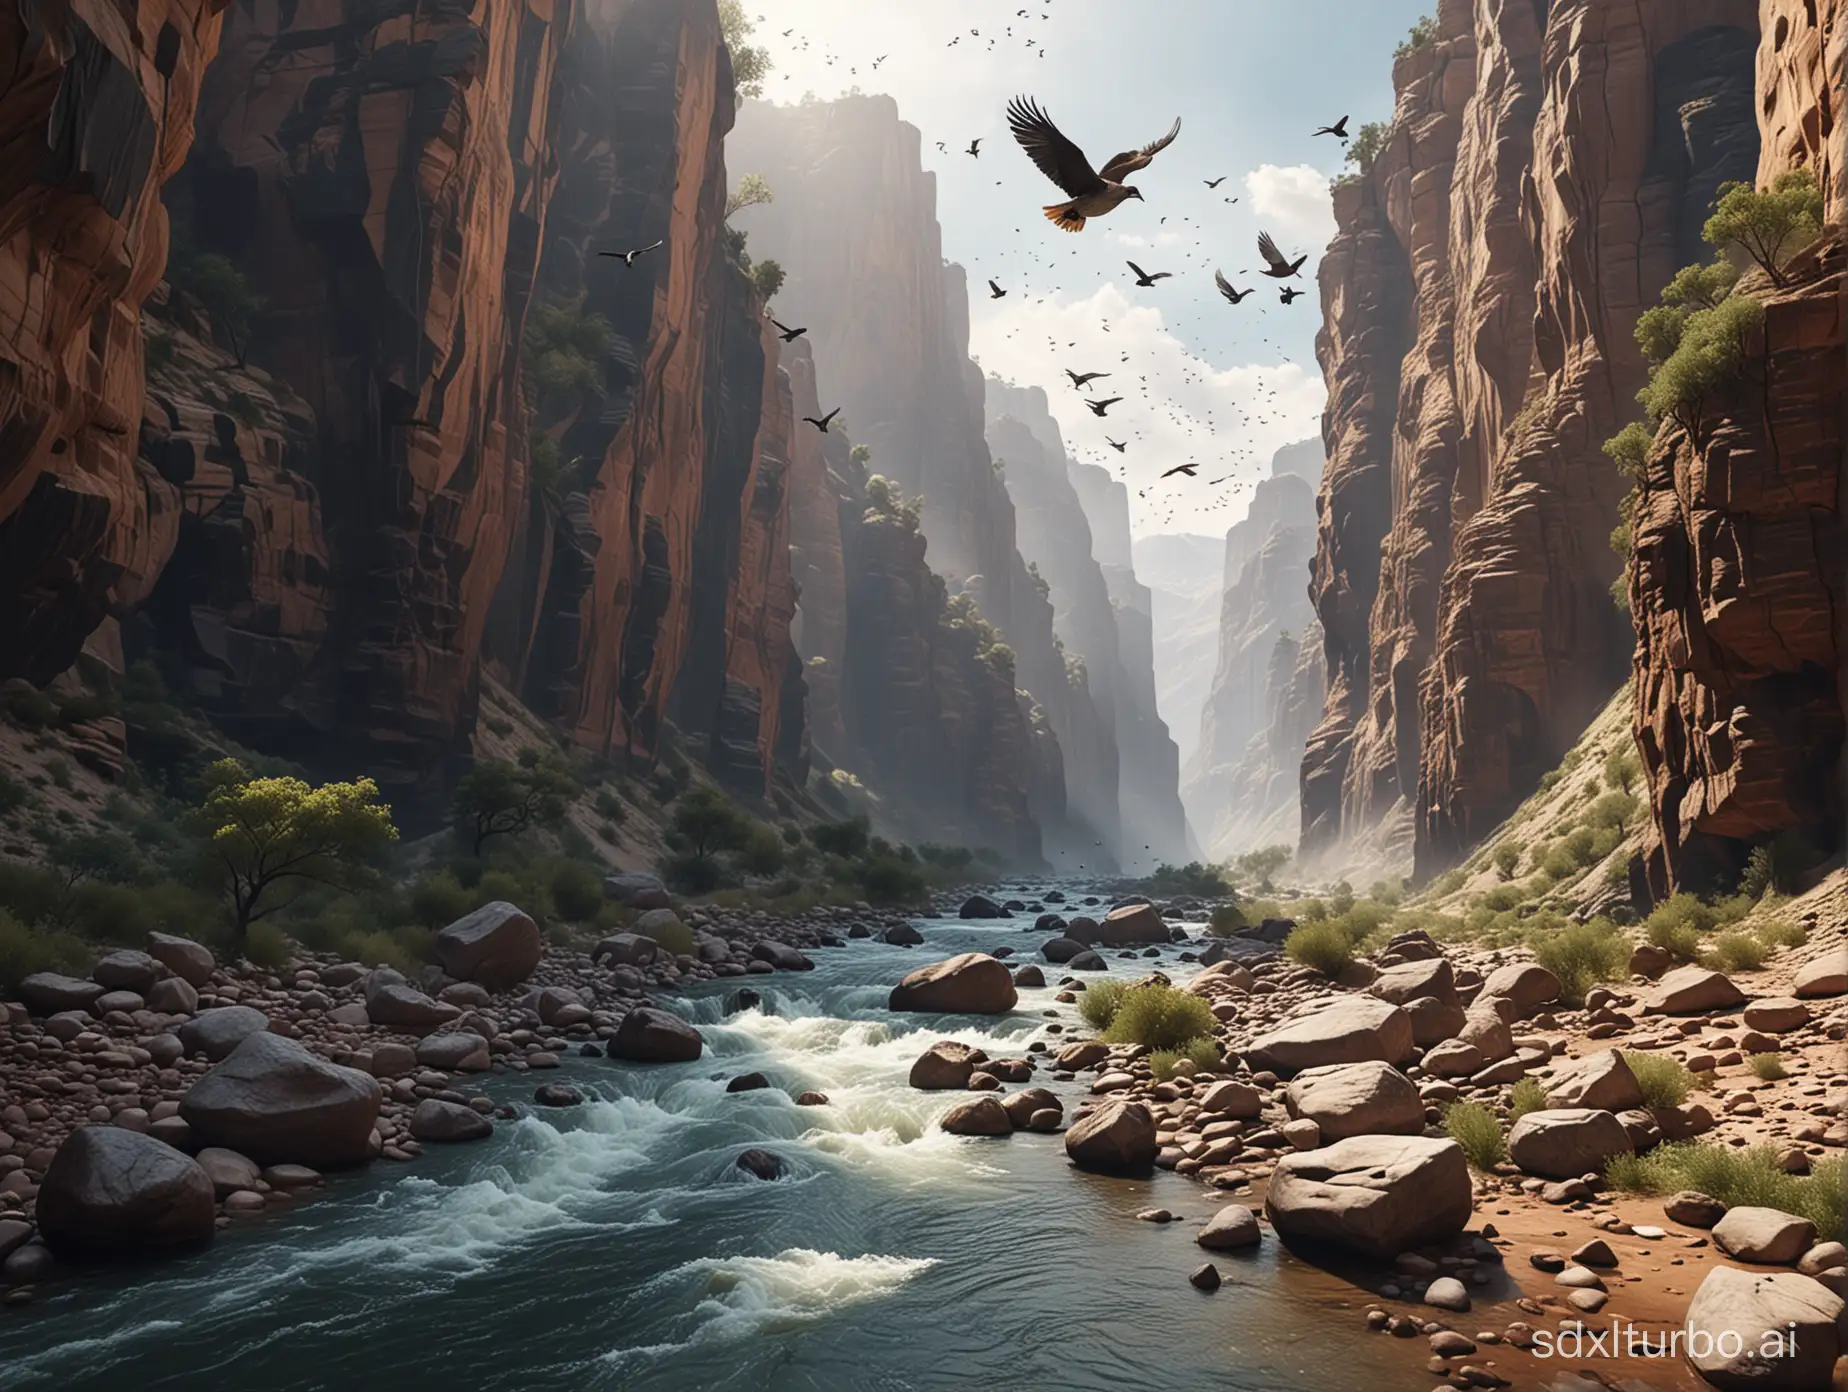 Deep canyon with a rushing river and birds flying over it. Realistic